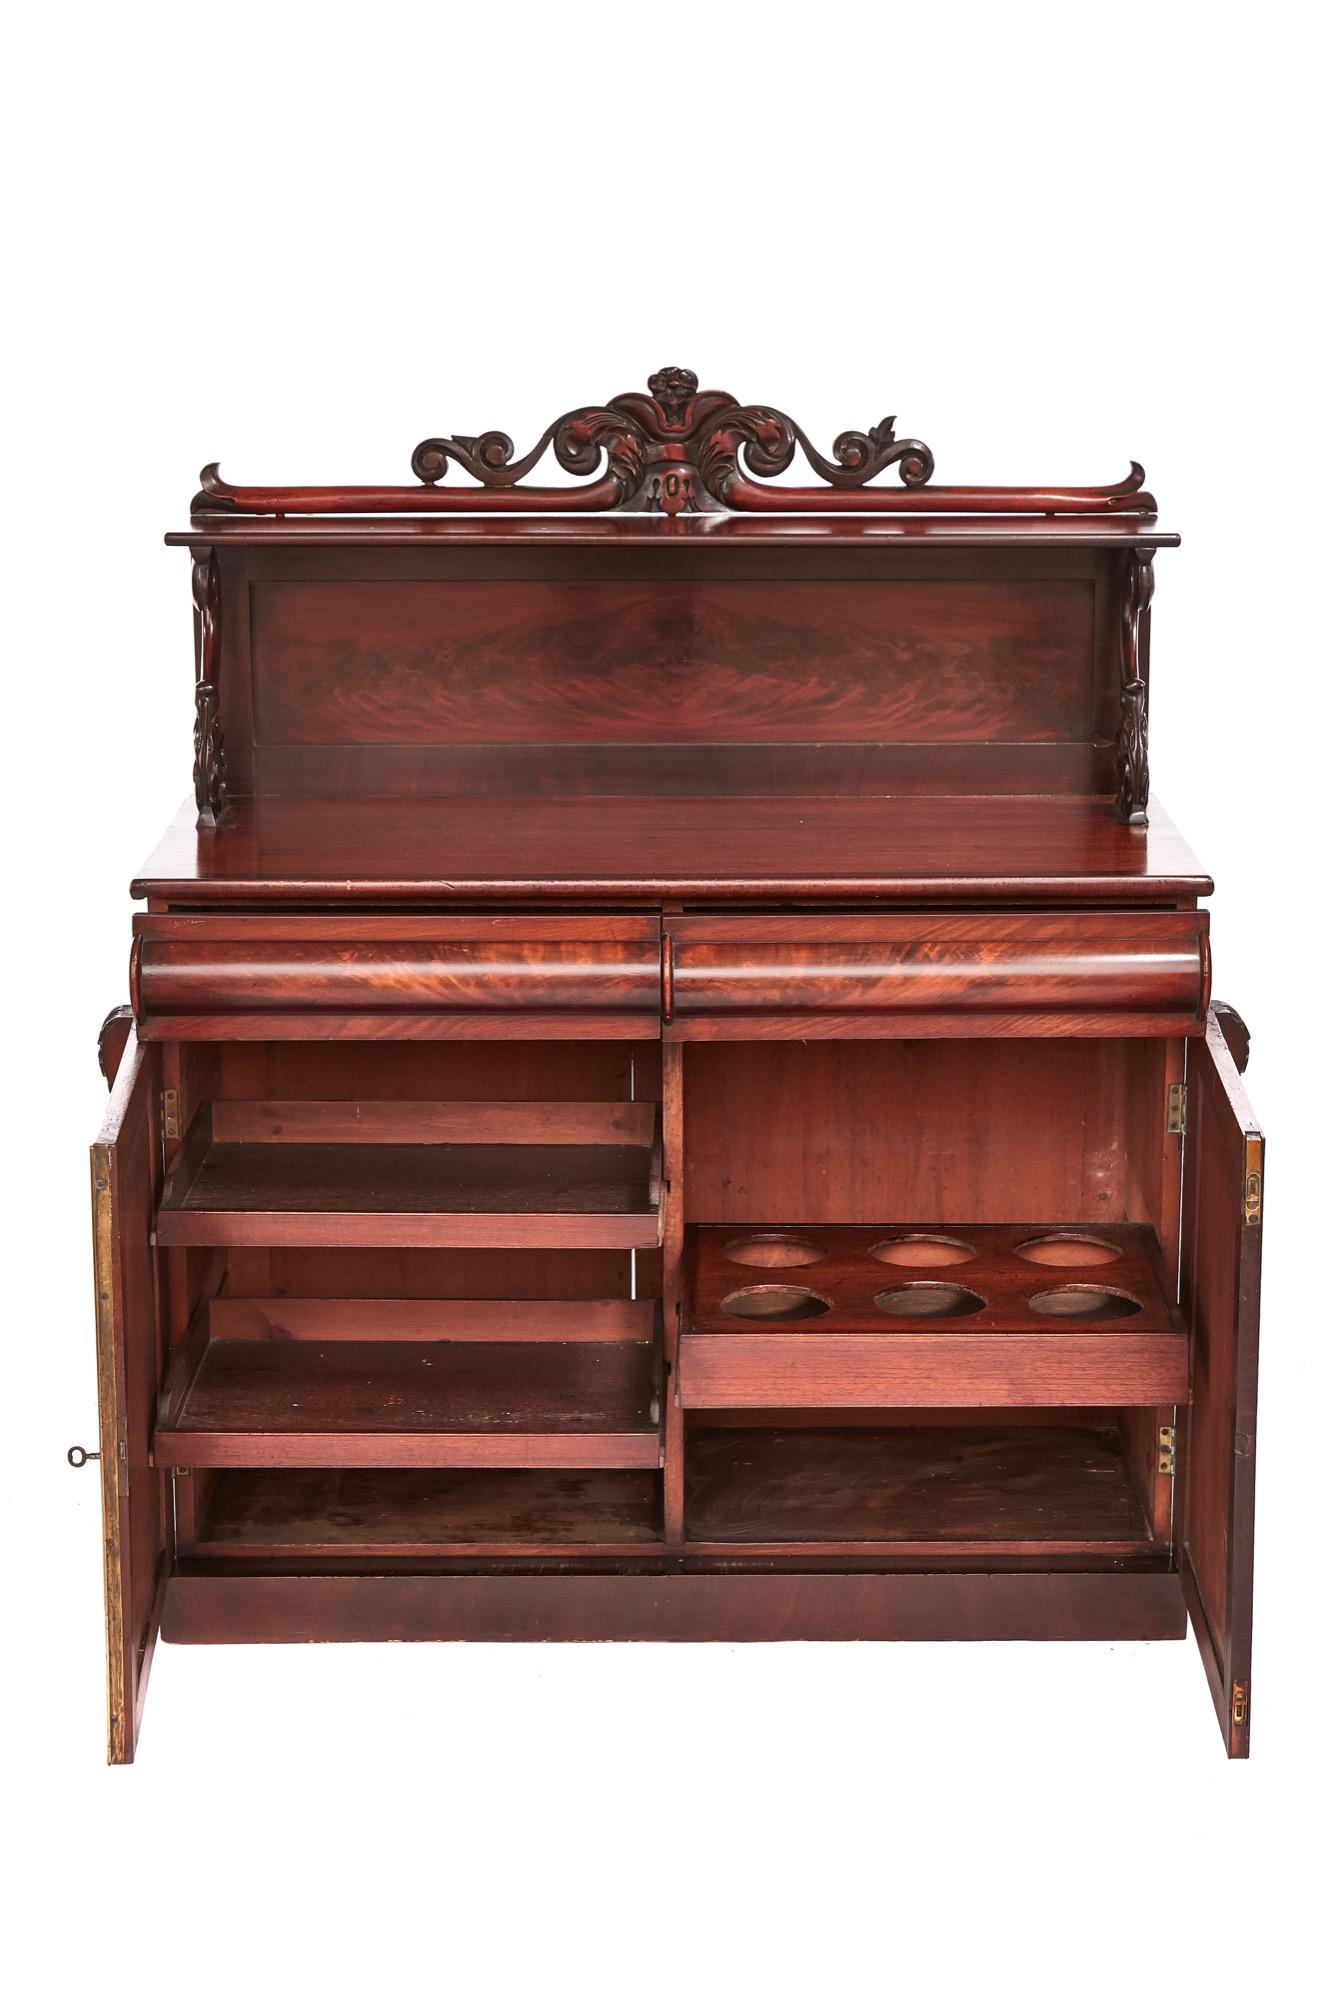 Early Victorian mahogany chiffonier with a beautifully carved back, the base boasts two frieze drawers and two mahogany doors opening to reveal a fitted interior.

In fine original condition.

  